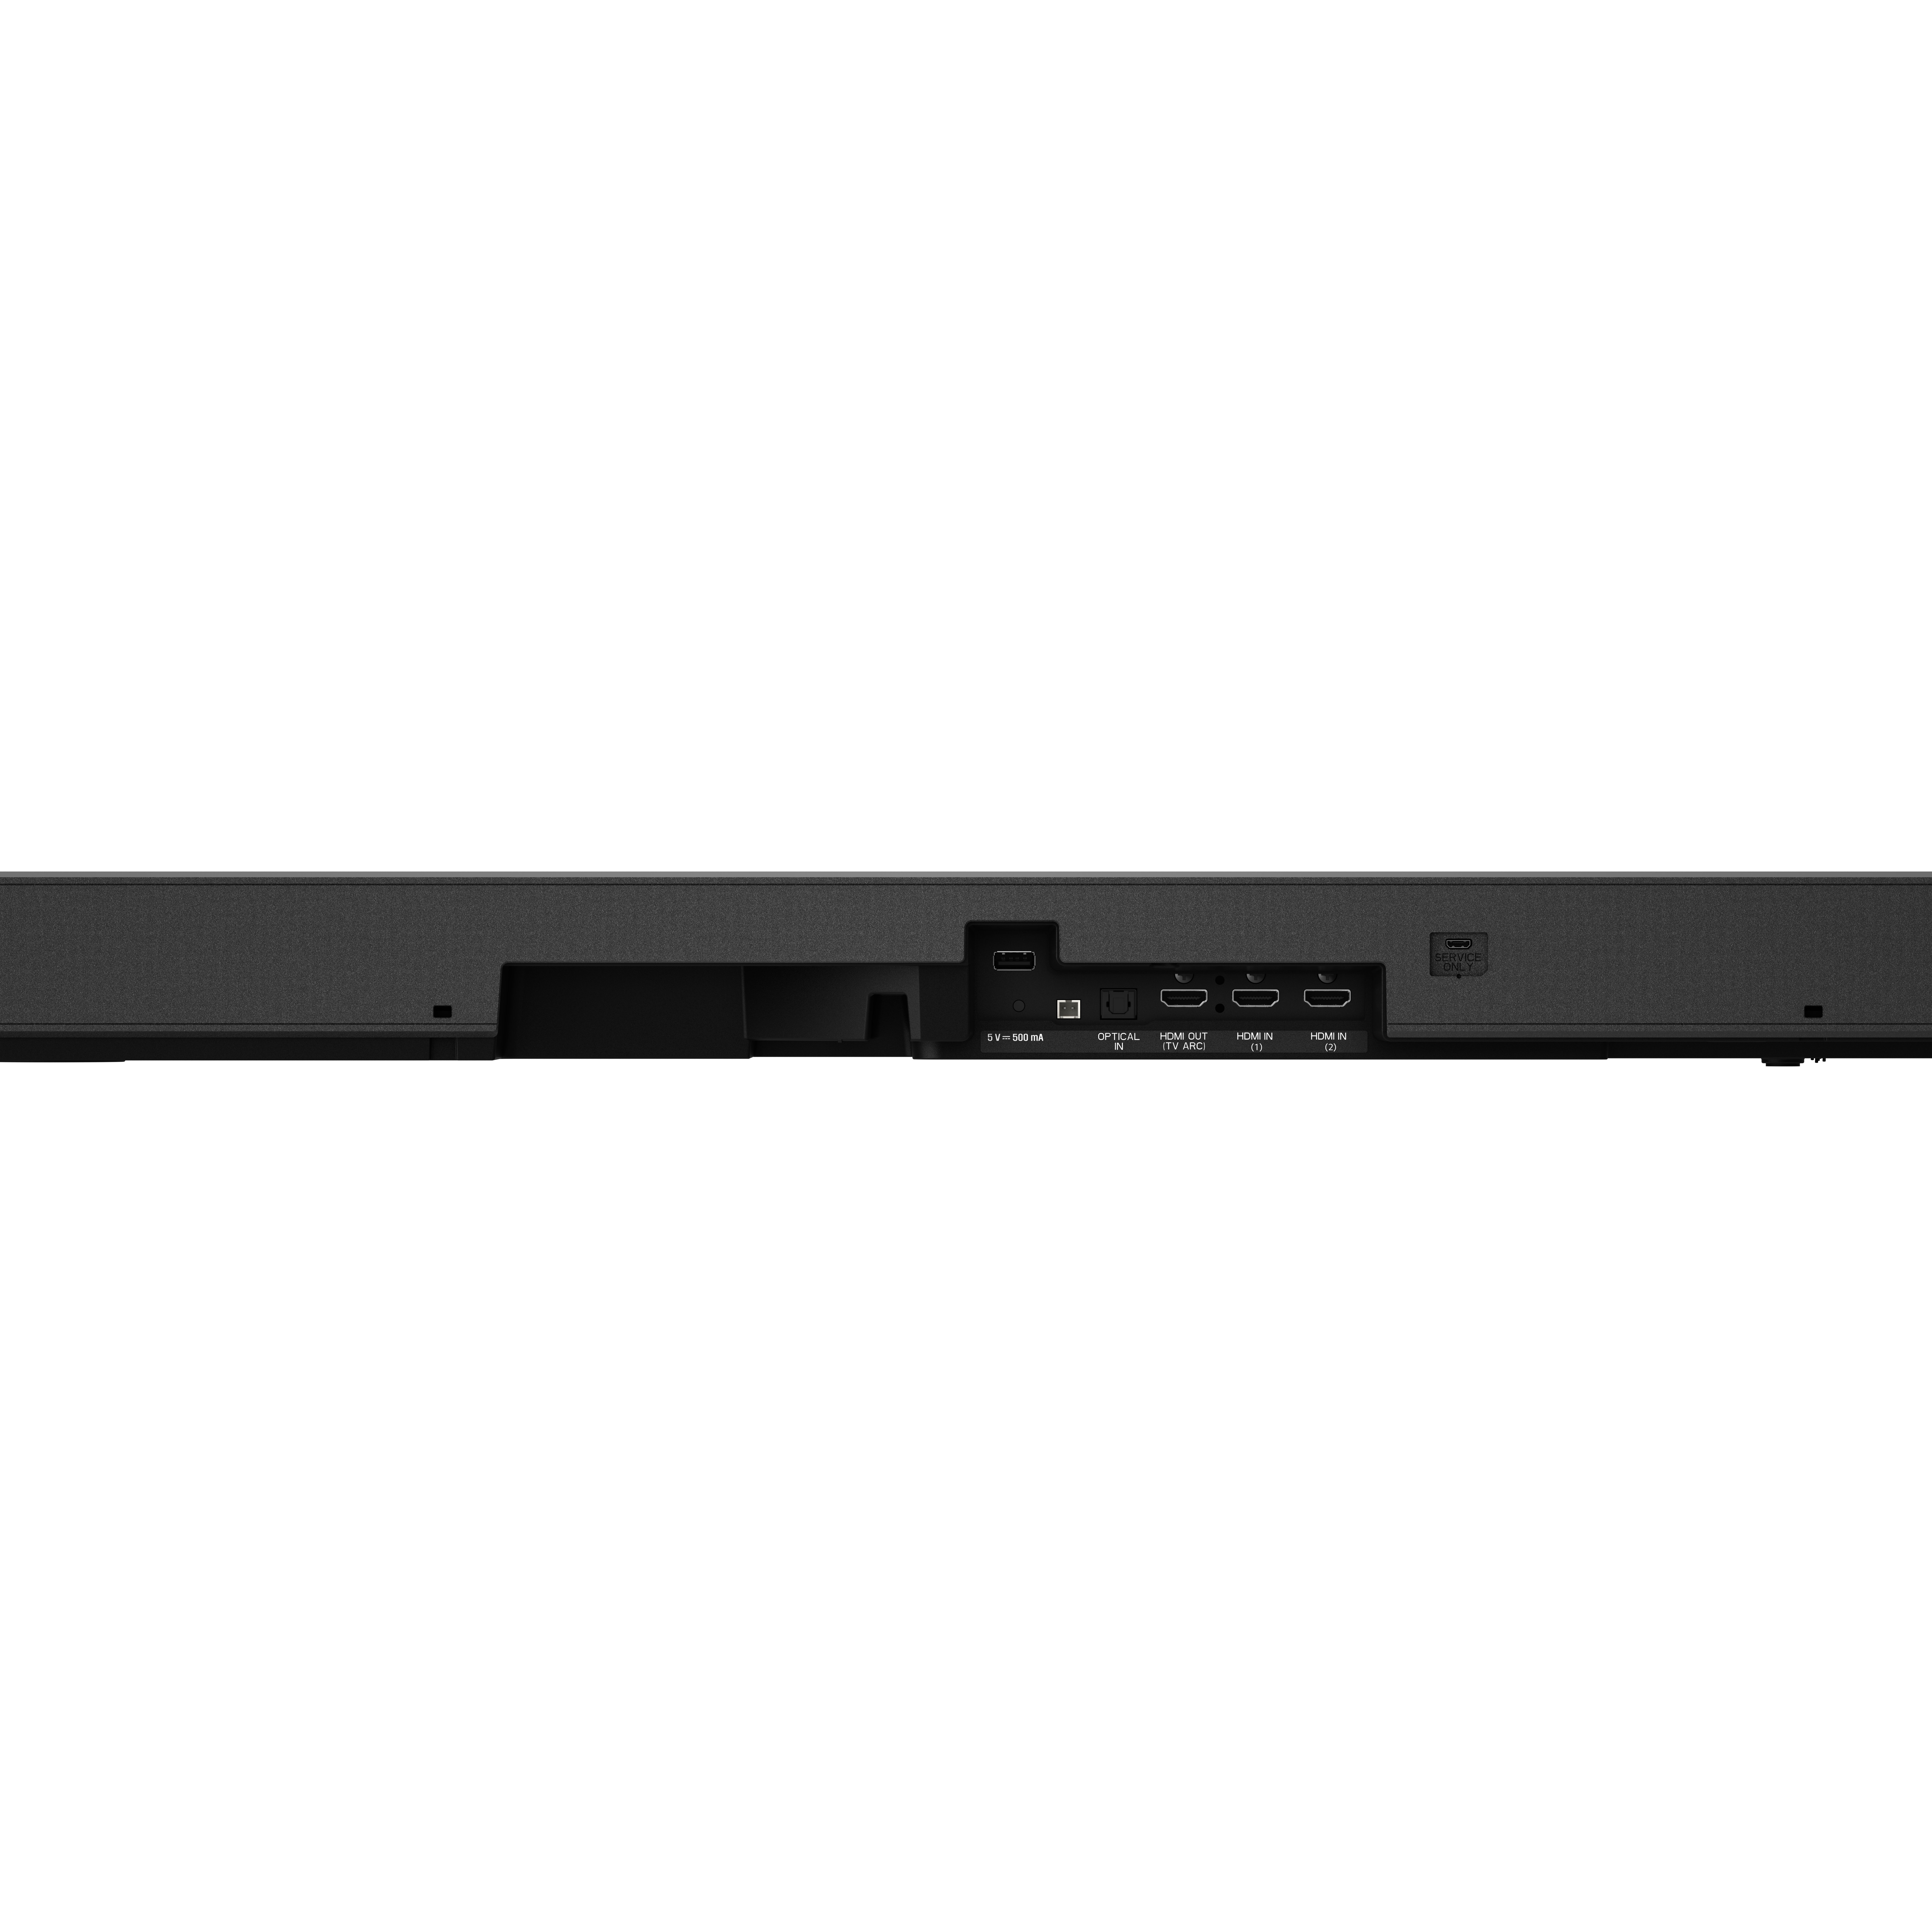 LG 7.1.4 Channel High-Res Audio Sound Bar with Dolby Atmos, Surround Speakers and Google Assistant Built-in - image 4 of 21